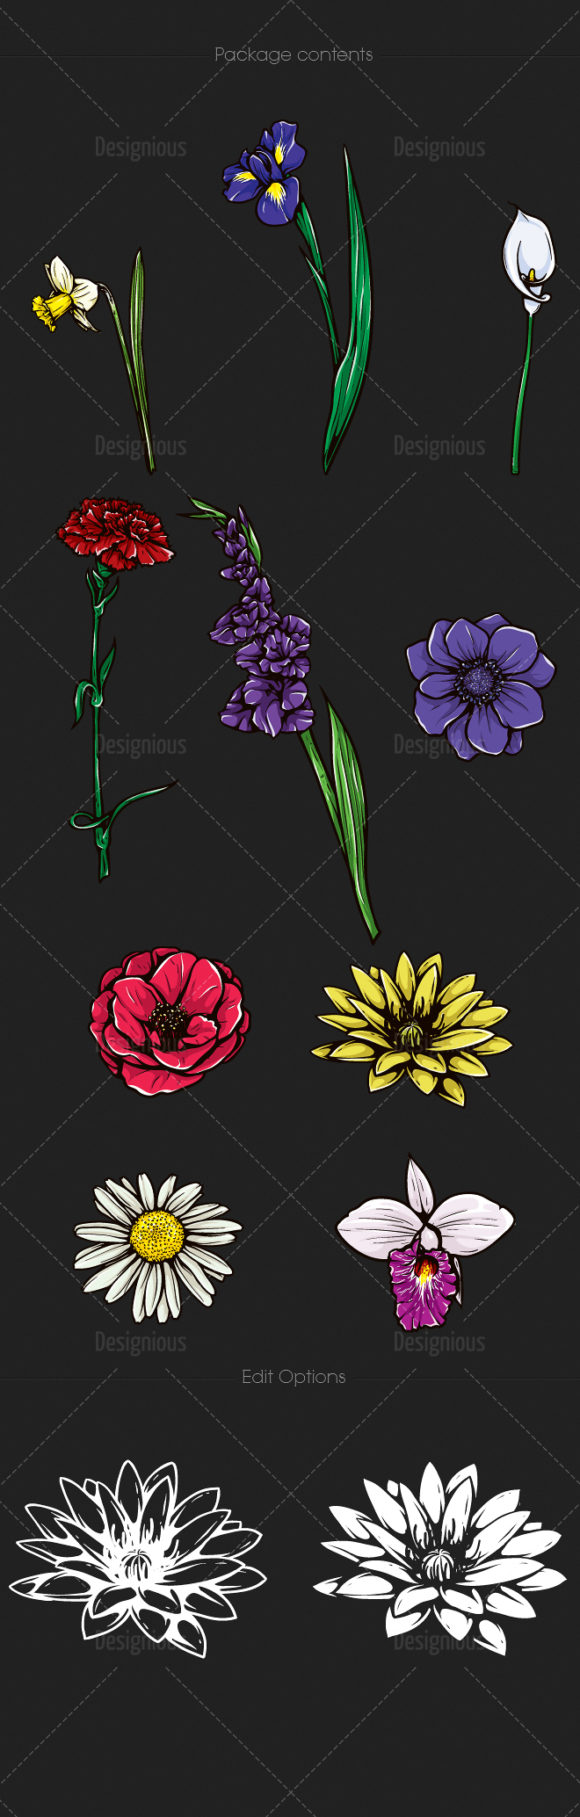 Floral Vector Pack 107 2